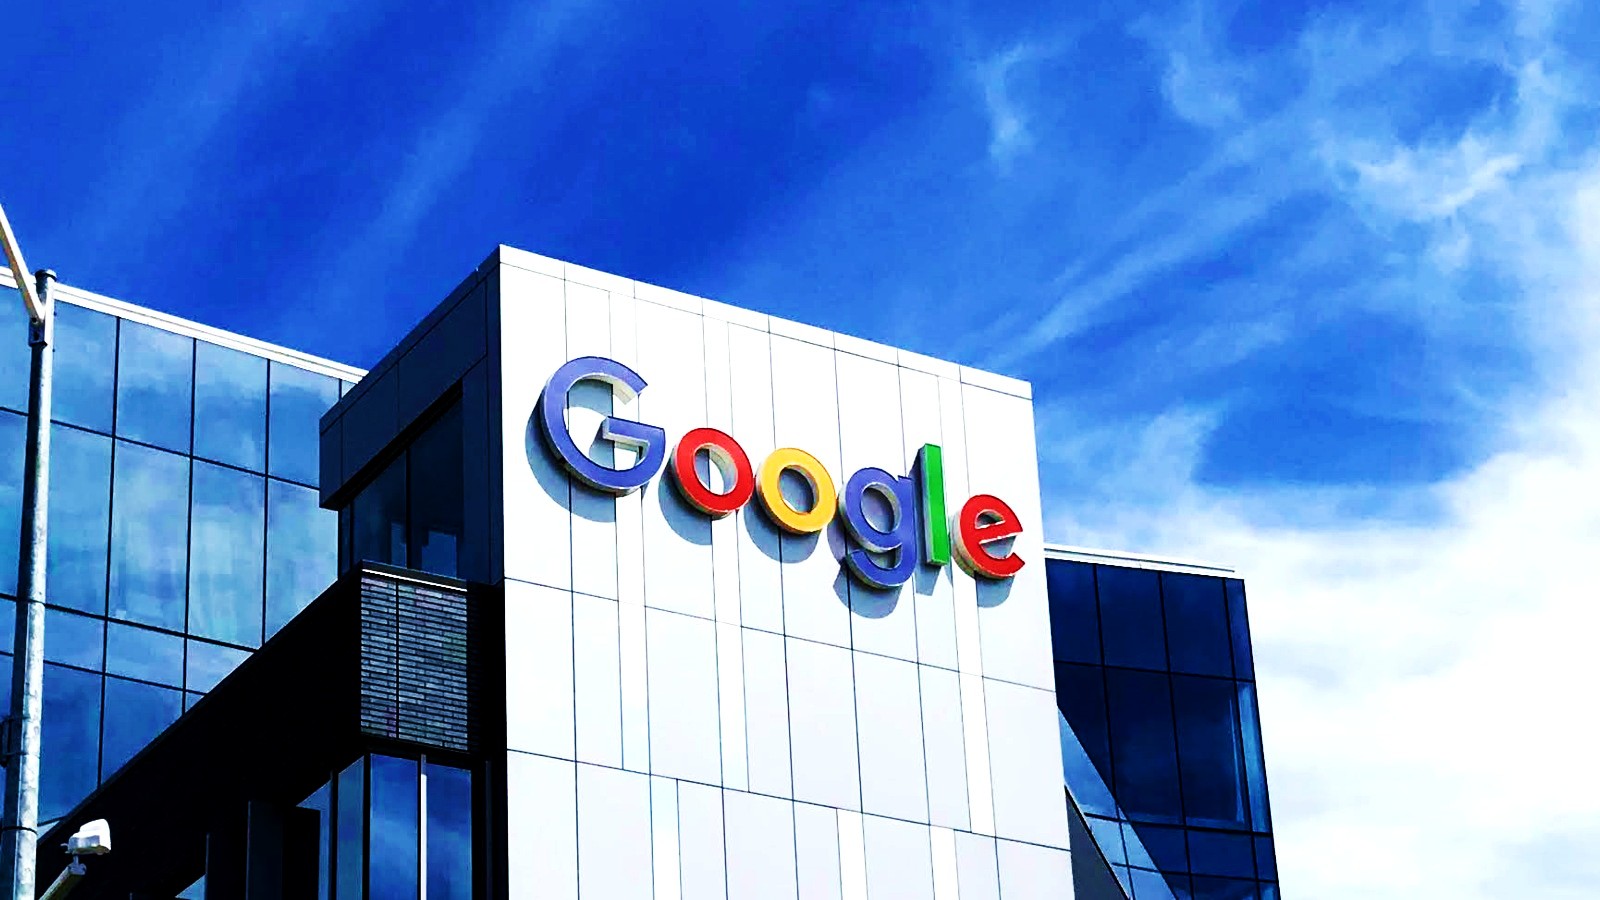 Google enables 2FA for over 150 million users in four months